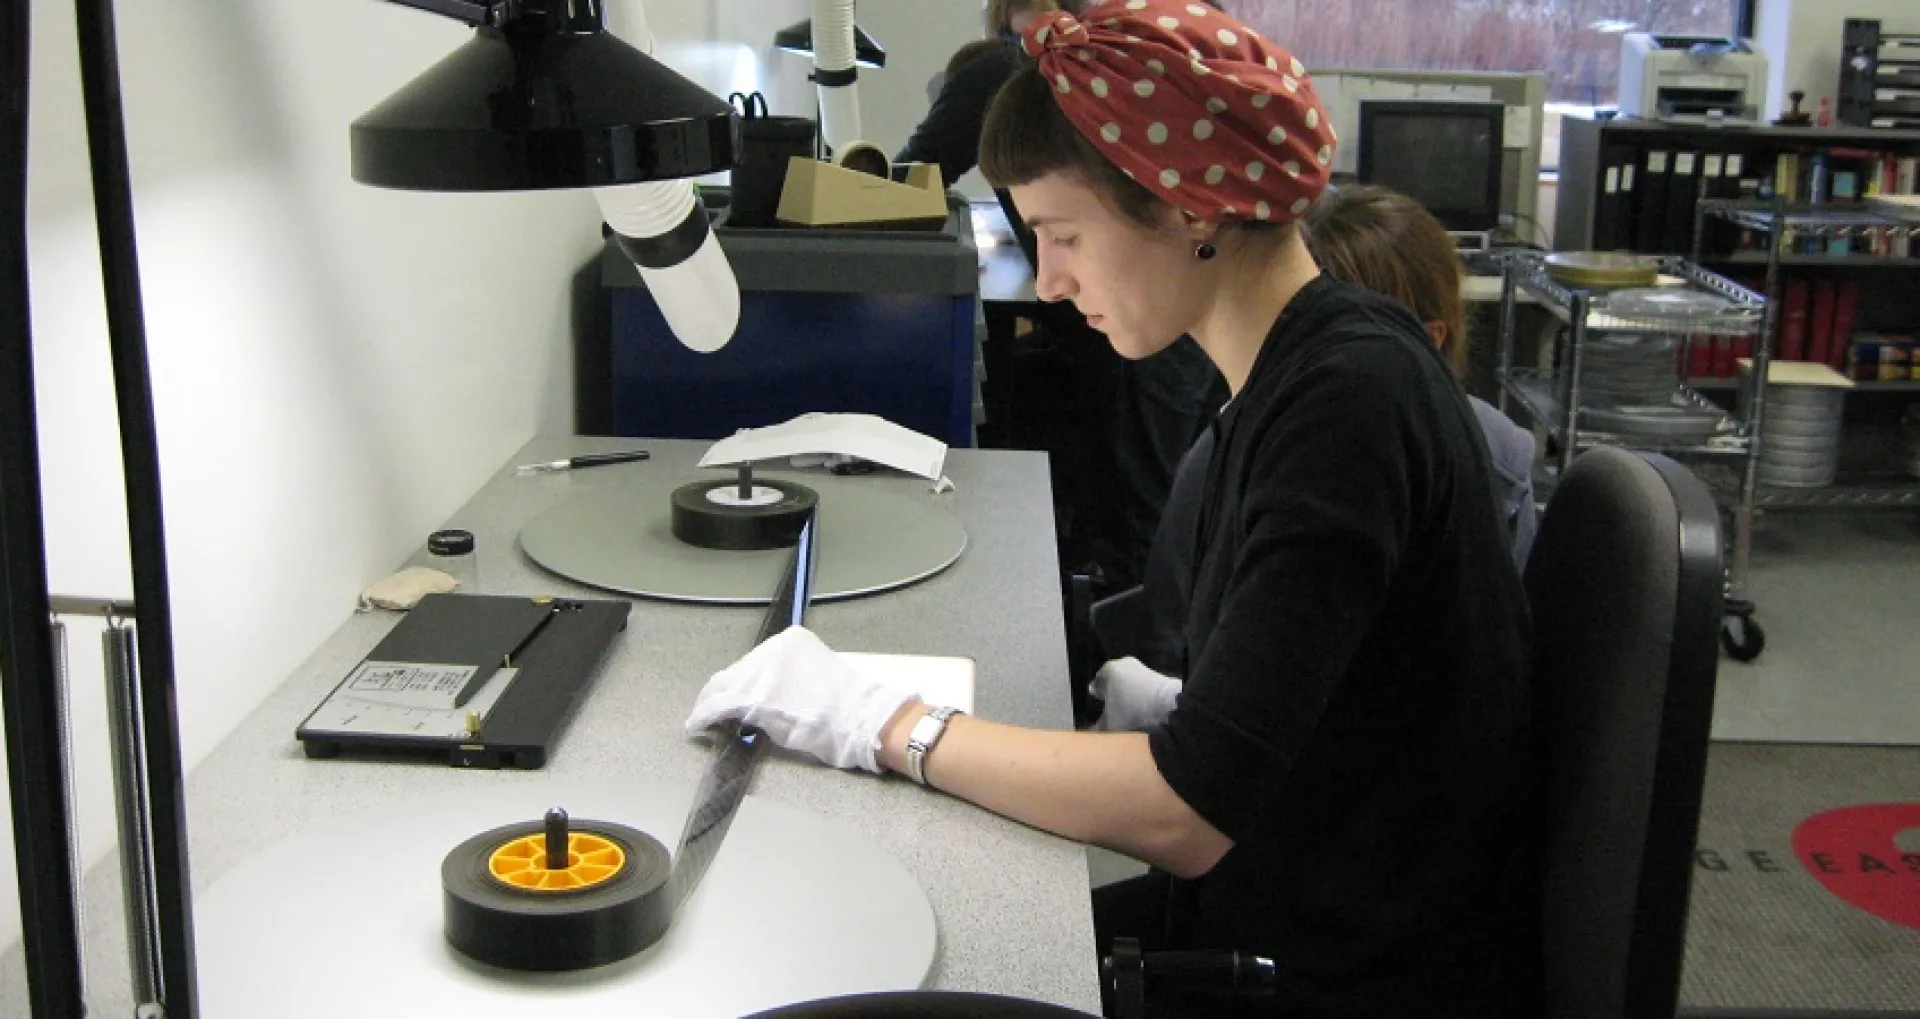 Students inspecting a print